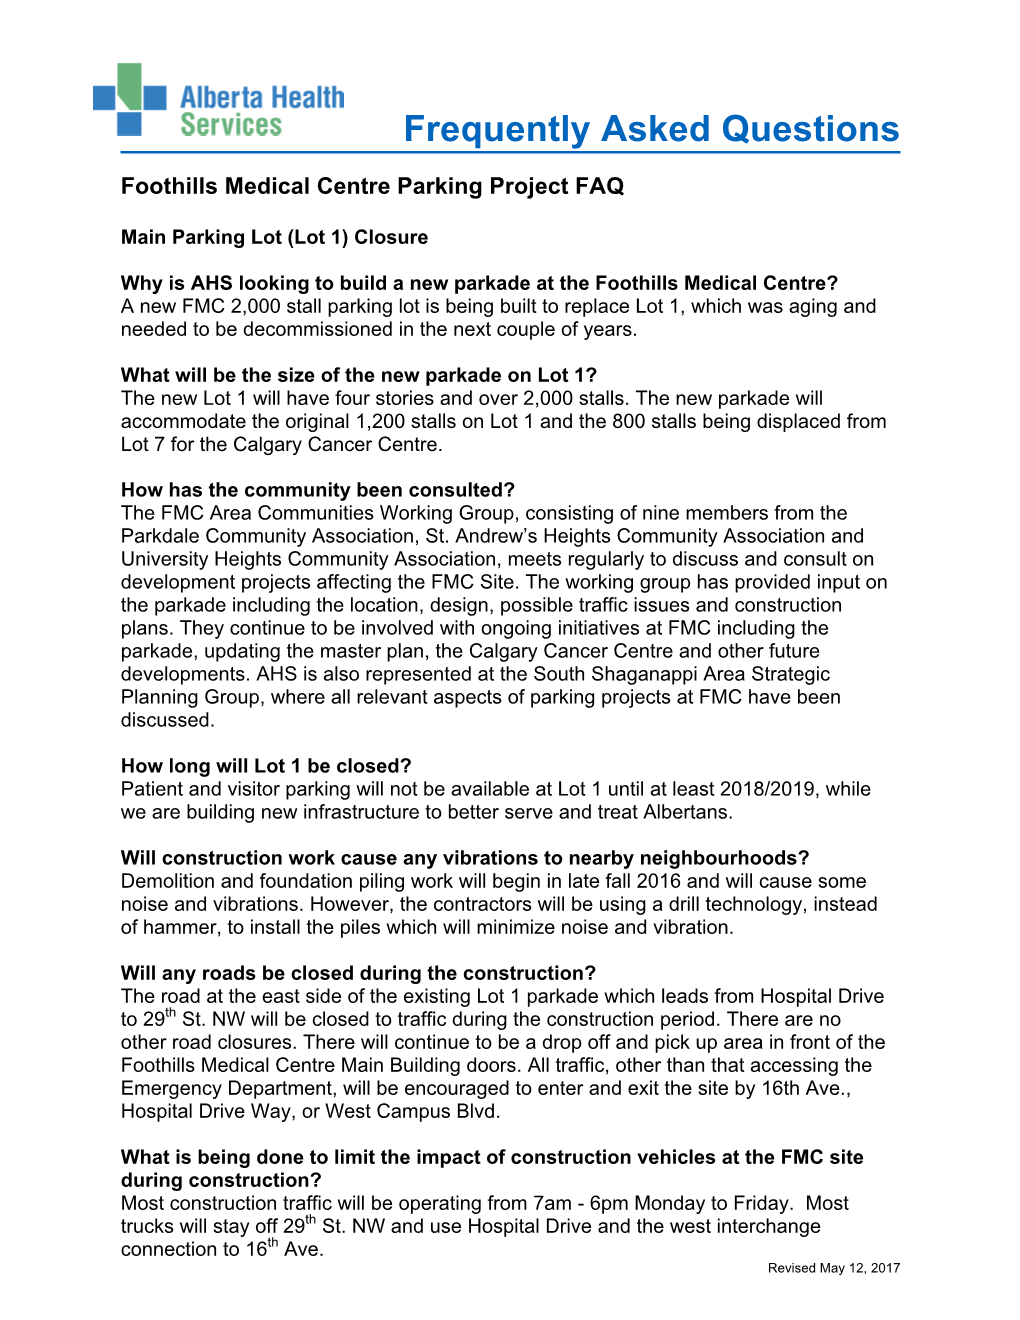 Foothills Medical Centre Parking Project FAQ